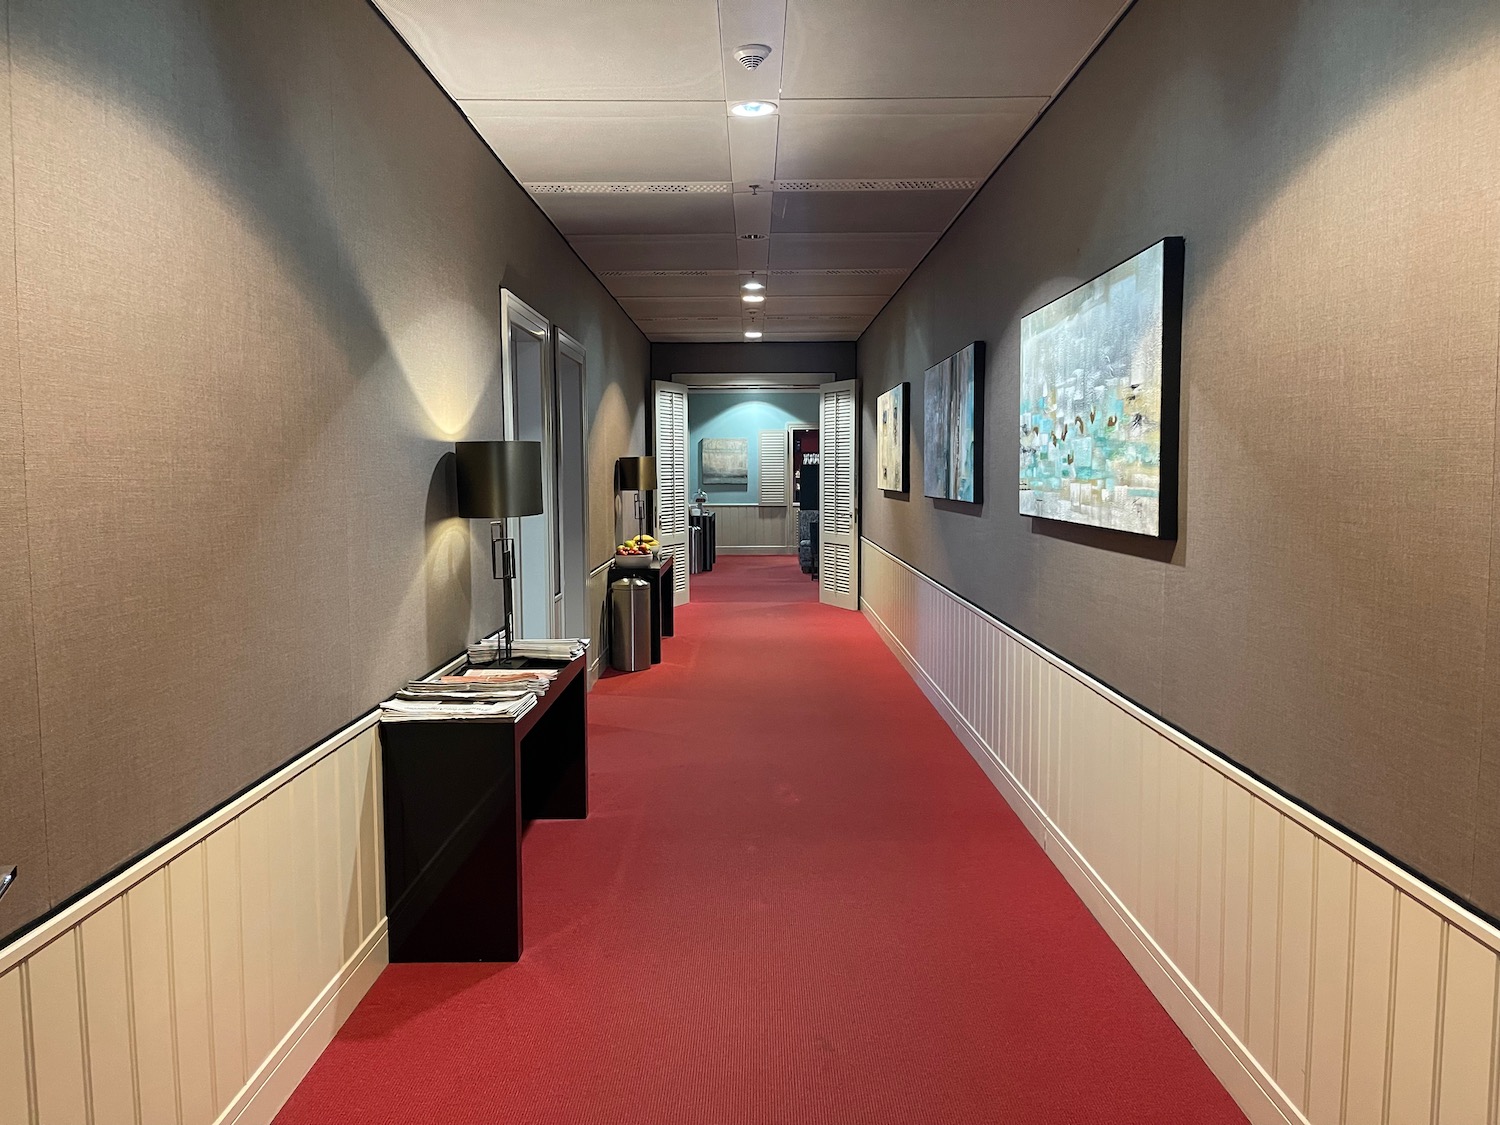 a hallway with red carpet and art on the wall